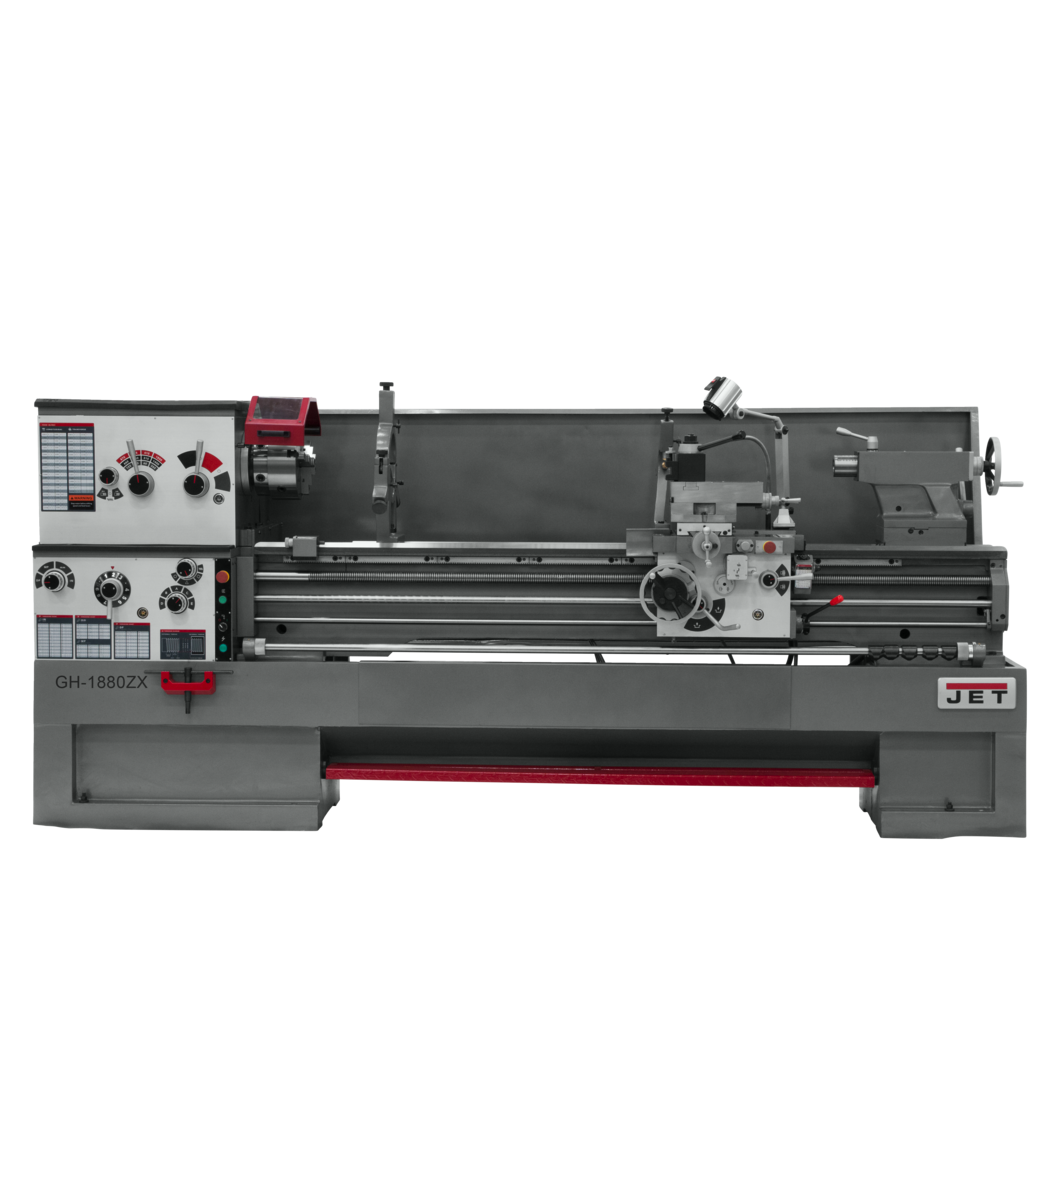 321597, GH-1880ZX , 18" Swing, 80" Between Centers, GH-1880ZX With ACU-RITE 303 DRO With Taper Attachment installed, Jet, Metalworking, Turning, Lathes